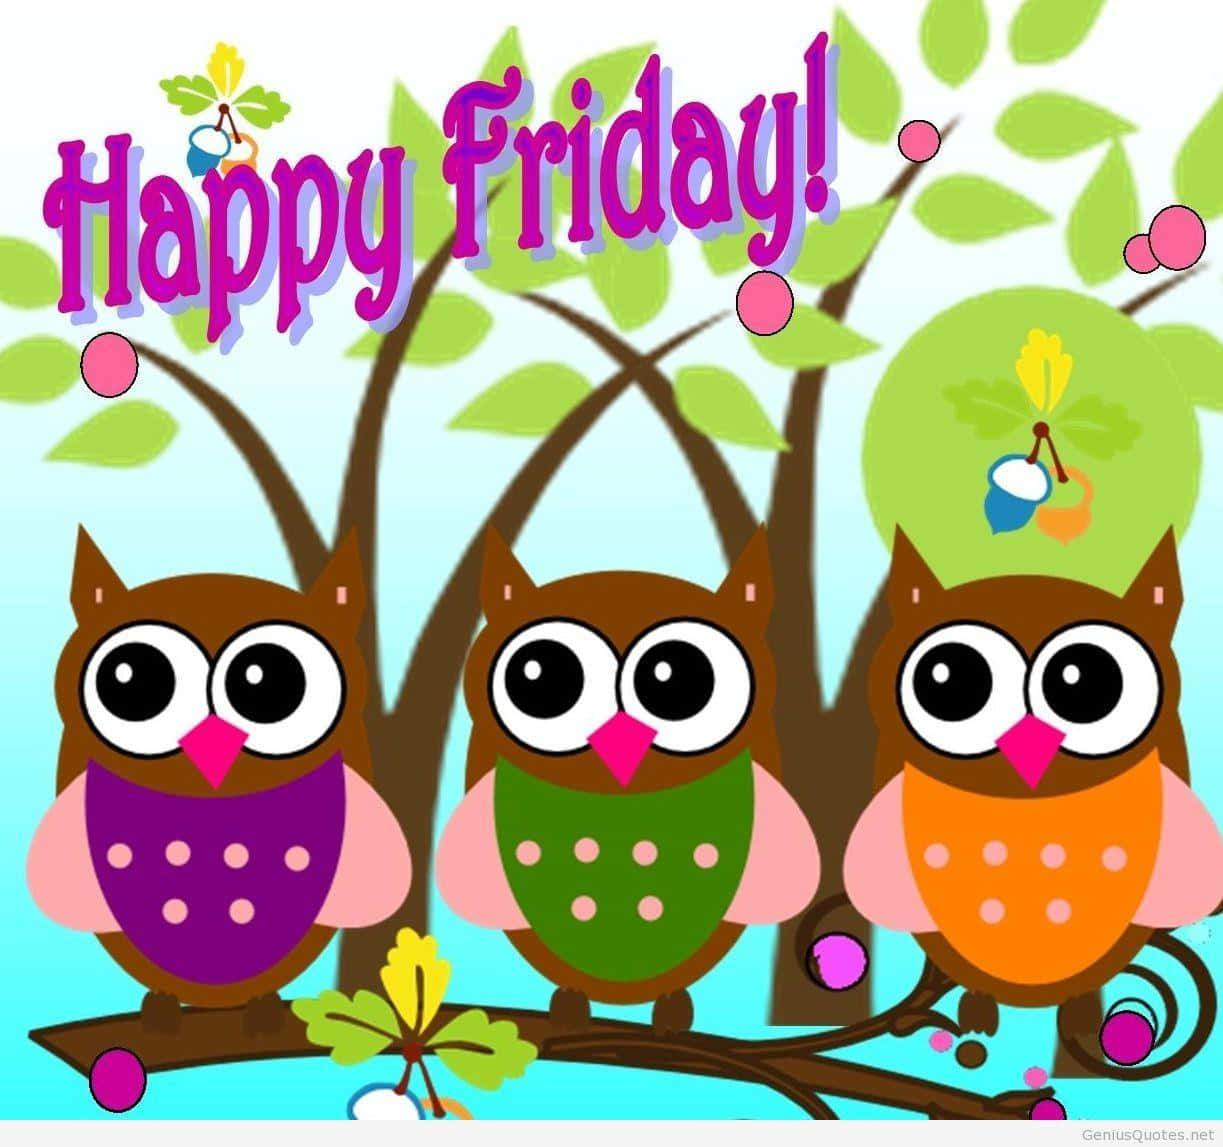 Happy Friday Owls With A Branch And A Tree Background